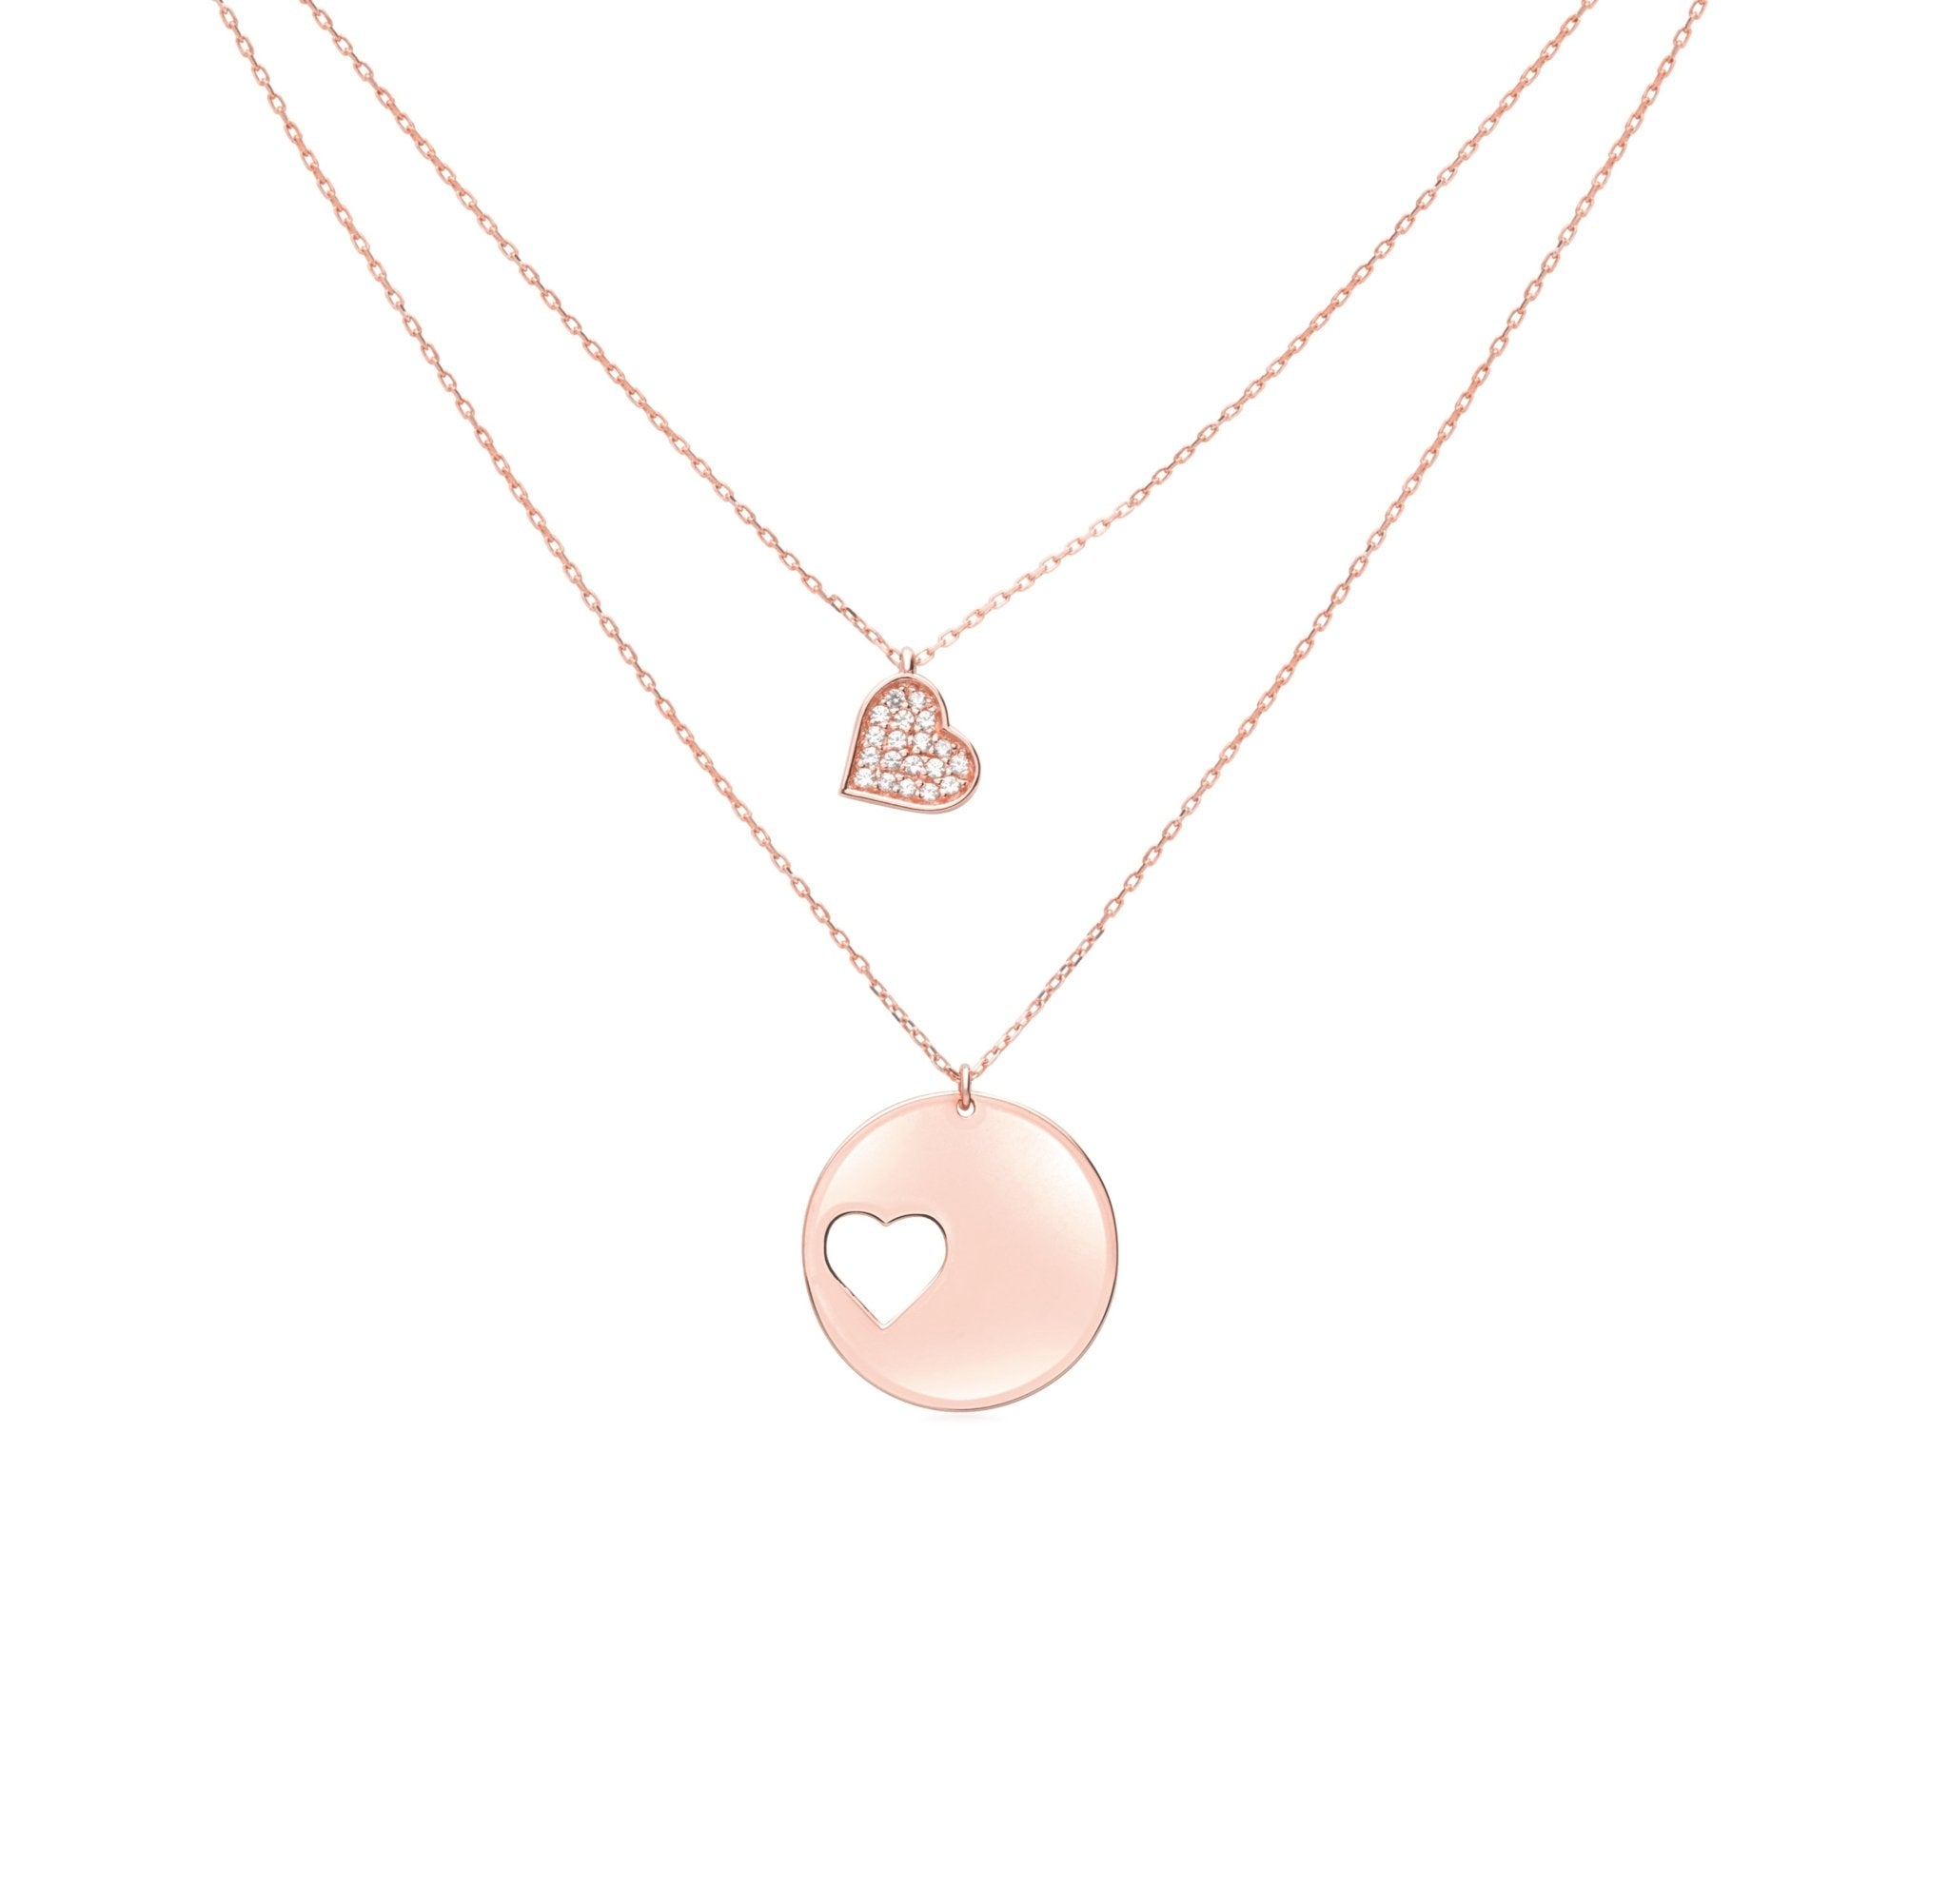 Sapphire Pave Cutout Heart Necklace in Rose Gold Necklaces Estella Collection #product_description# 17759 14k Diamond Gemstone #tag4# #tag5# #tag6# #tag7# #tag8# #tag9# #tag10#